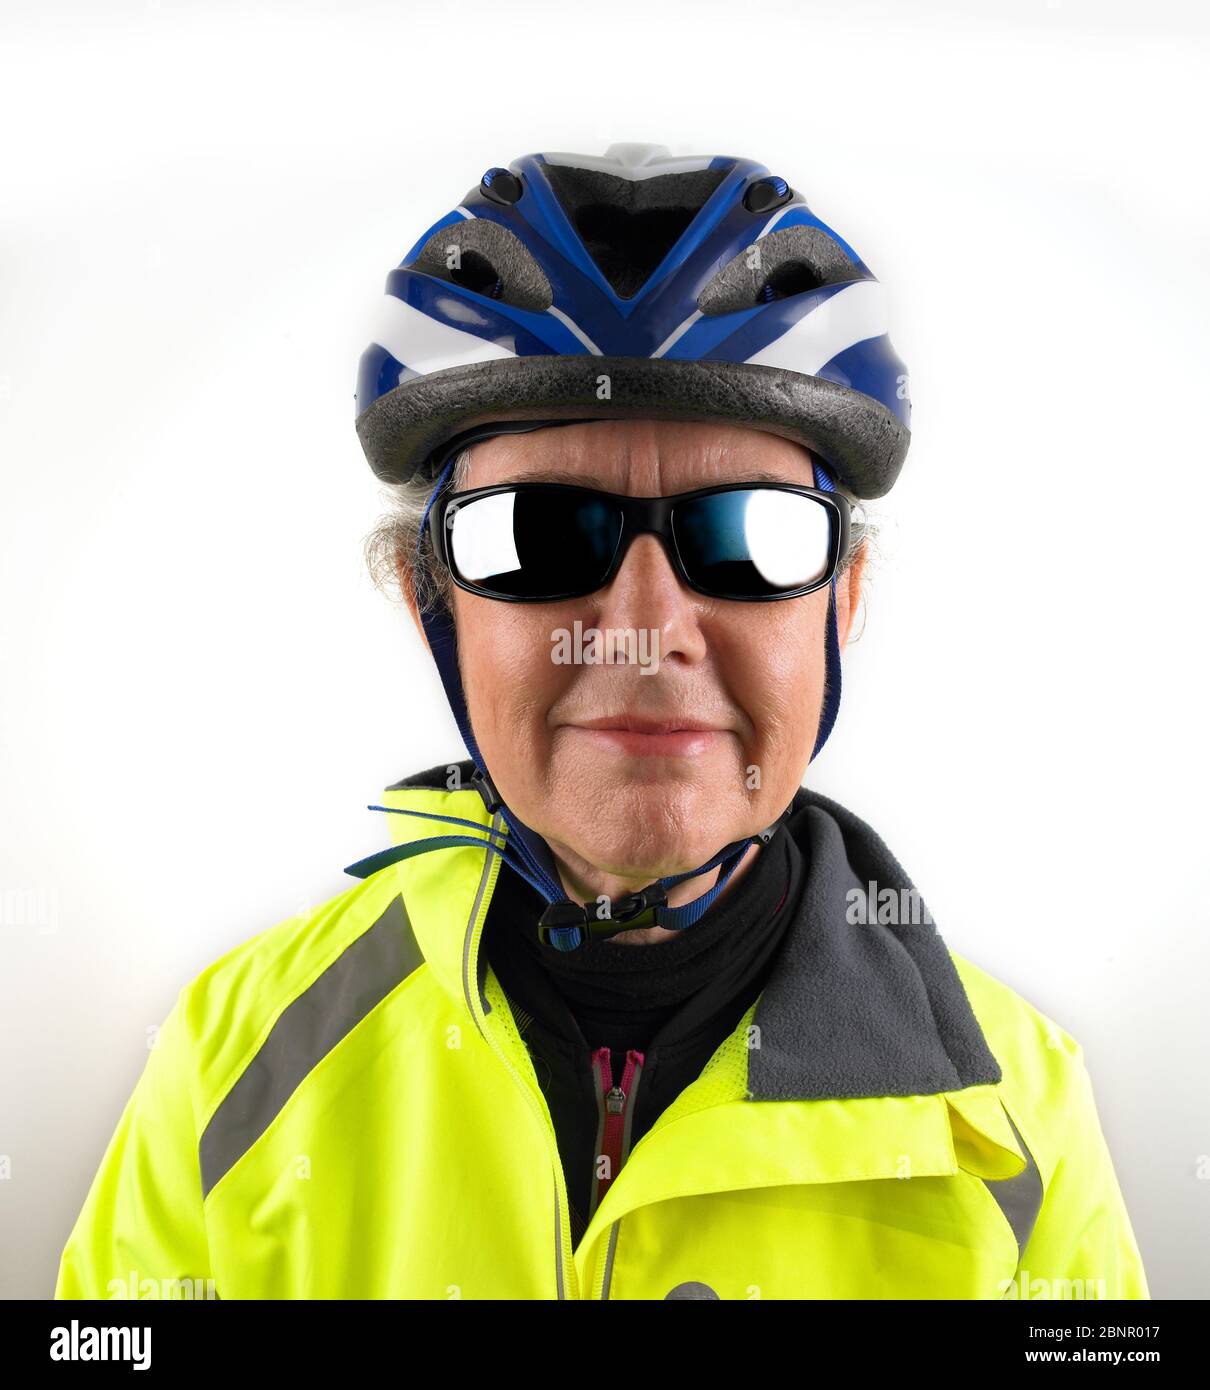 Woman cyclist wearing helmet and high visibility jacket Stock Photo